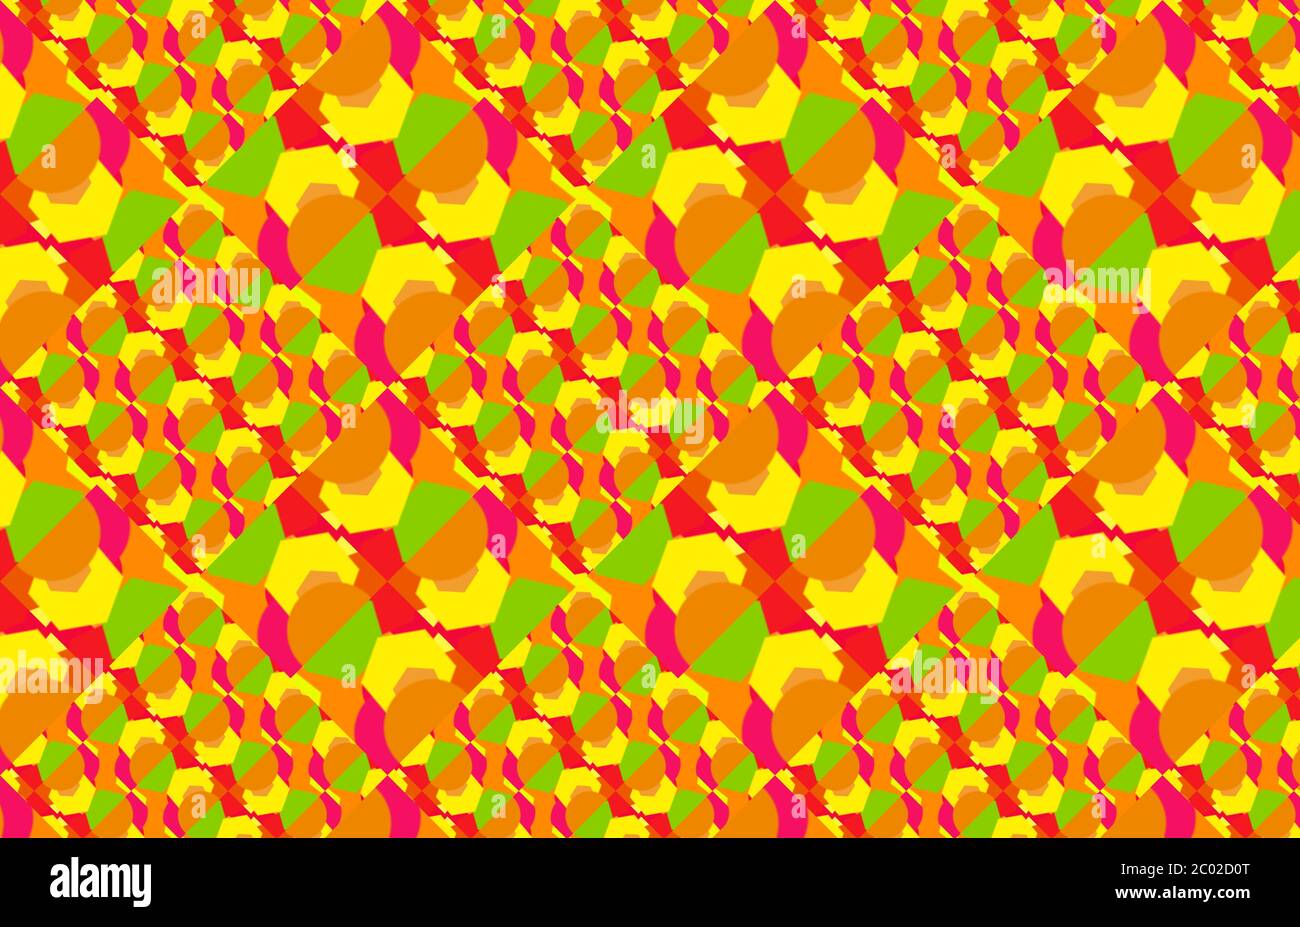 decorative colored geometric abstract pattern Stock Photo